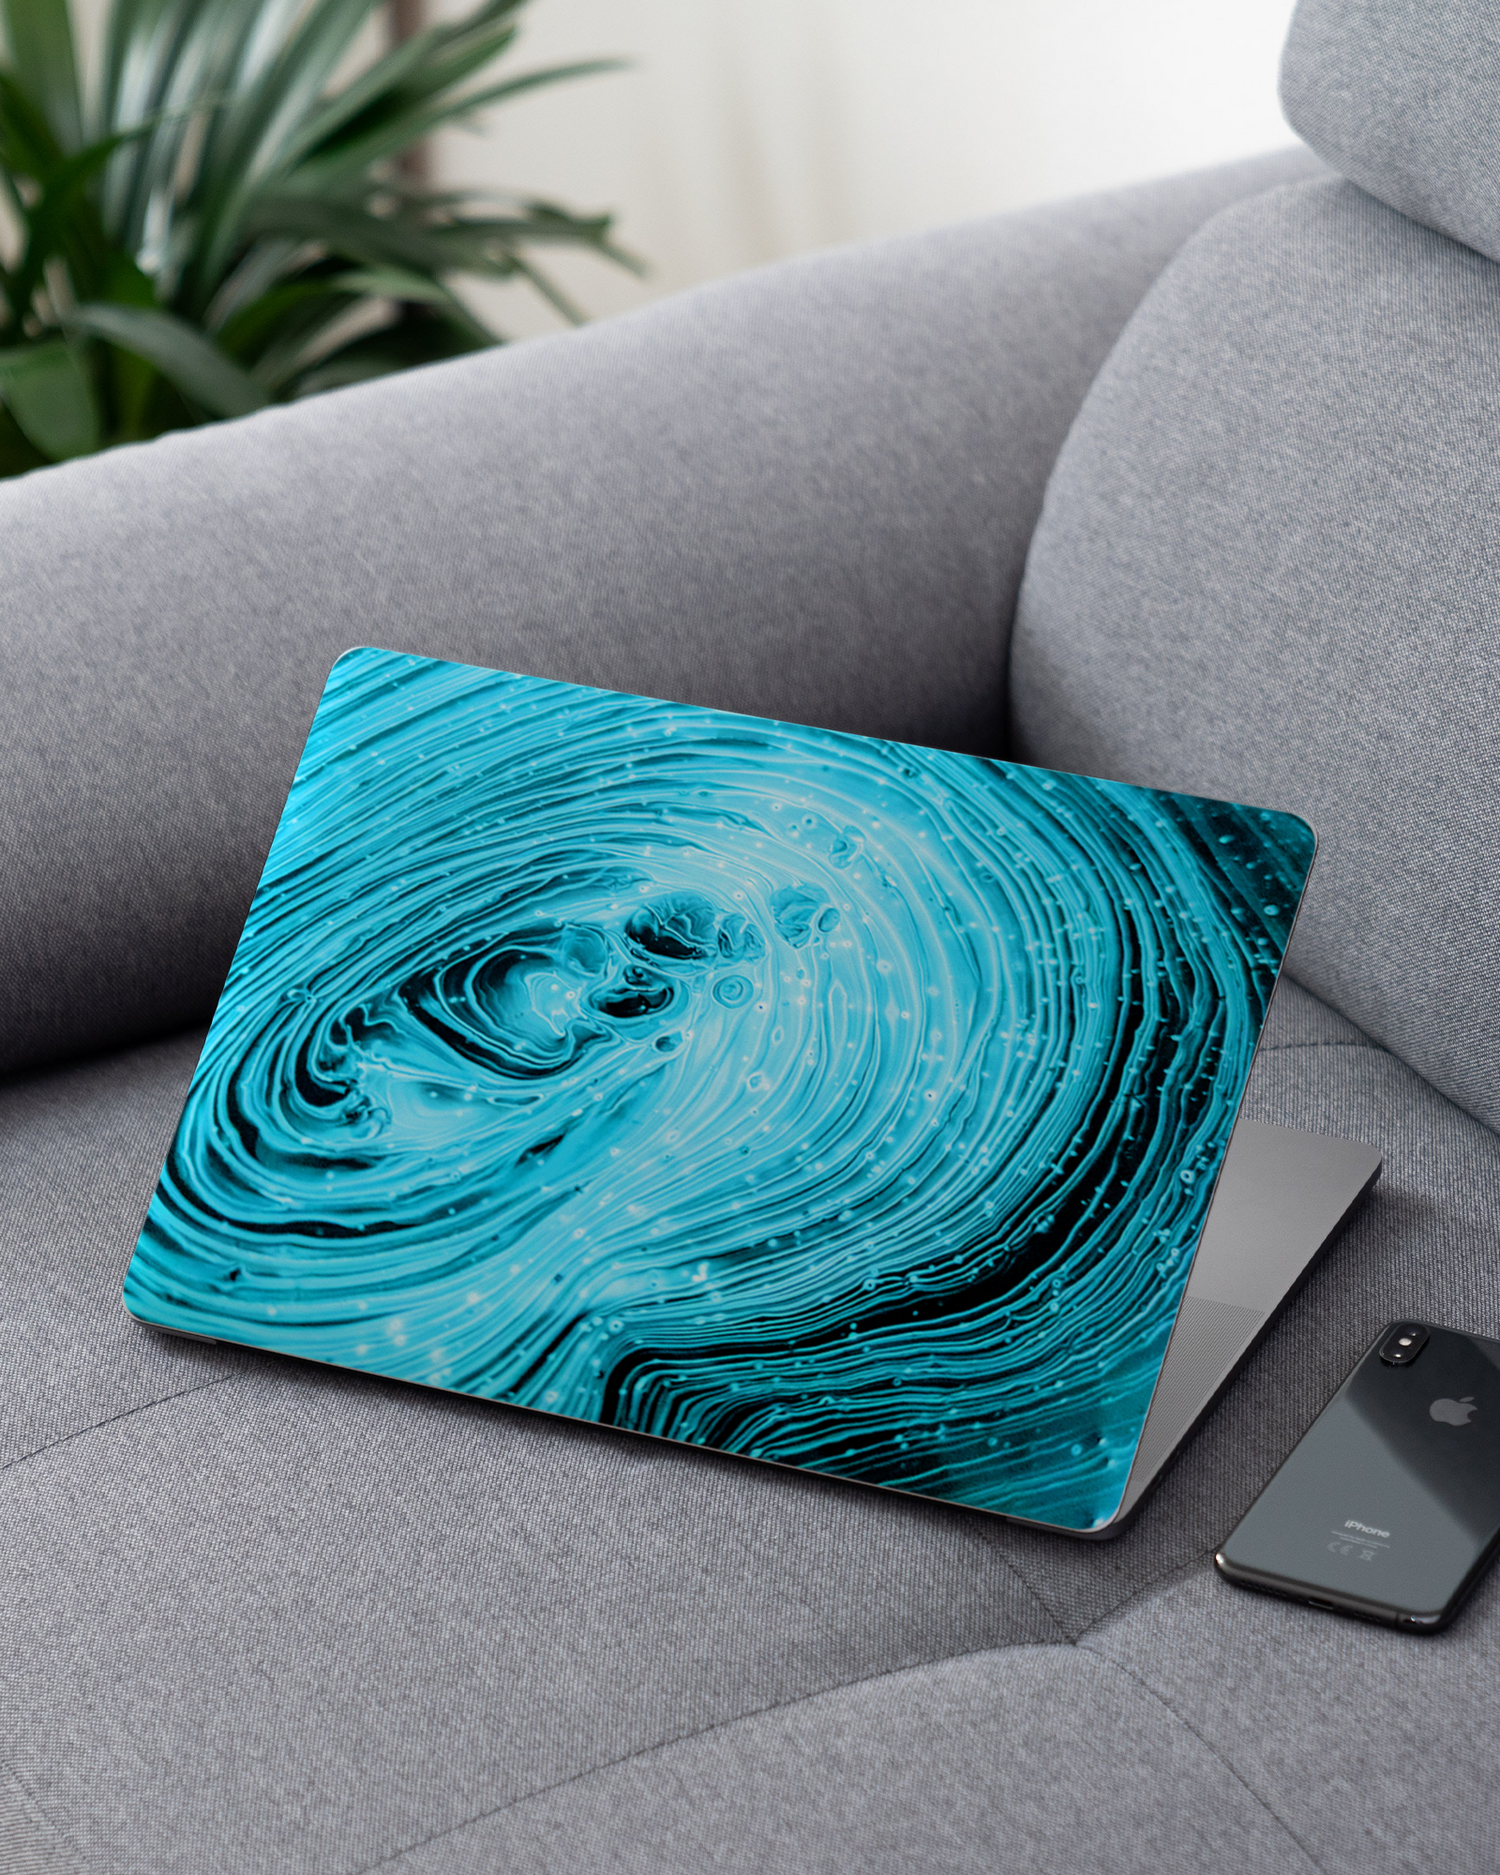 Turquoise Ripples Laptop Skin for 13 inch Apple MacBooks on a couch